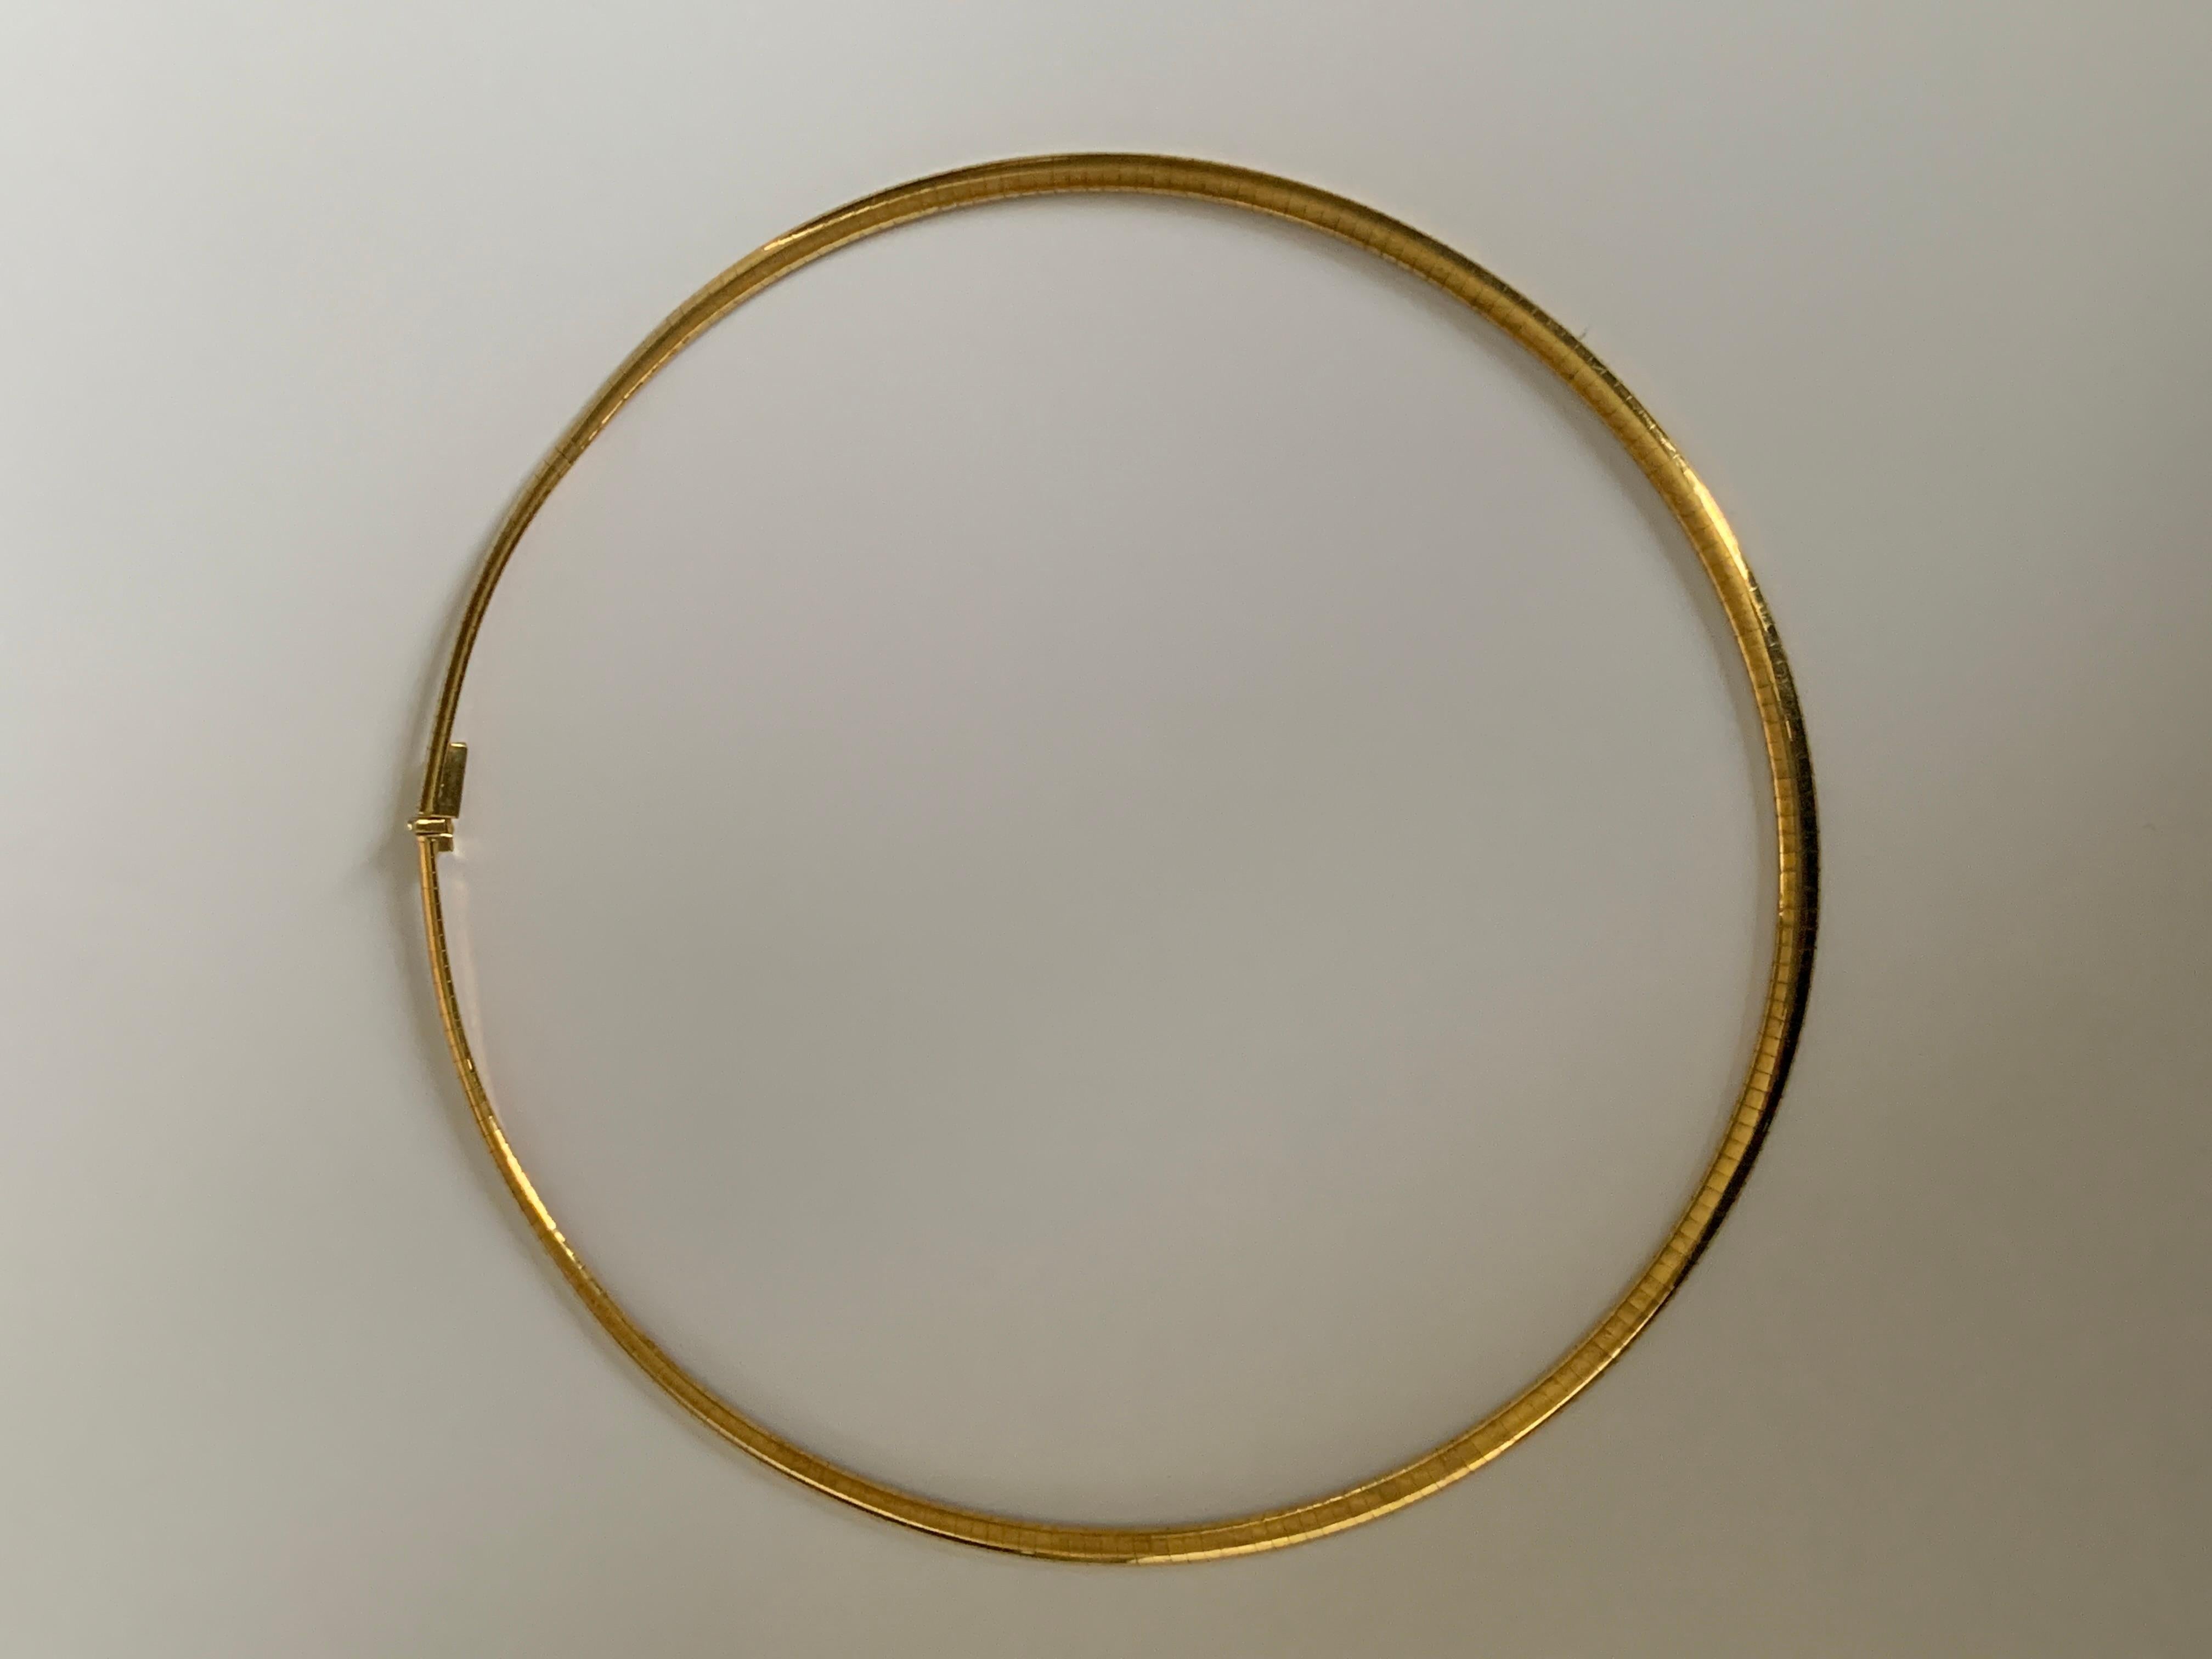 9ct Gold choker
with both British and Italian Hallmarks 
In excellent condition
Weight 21 grams
Circumference 16.1 Inches
Max Neck size fit 15.5